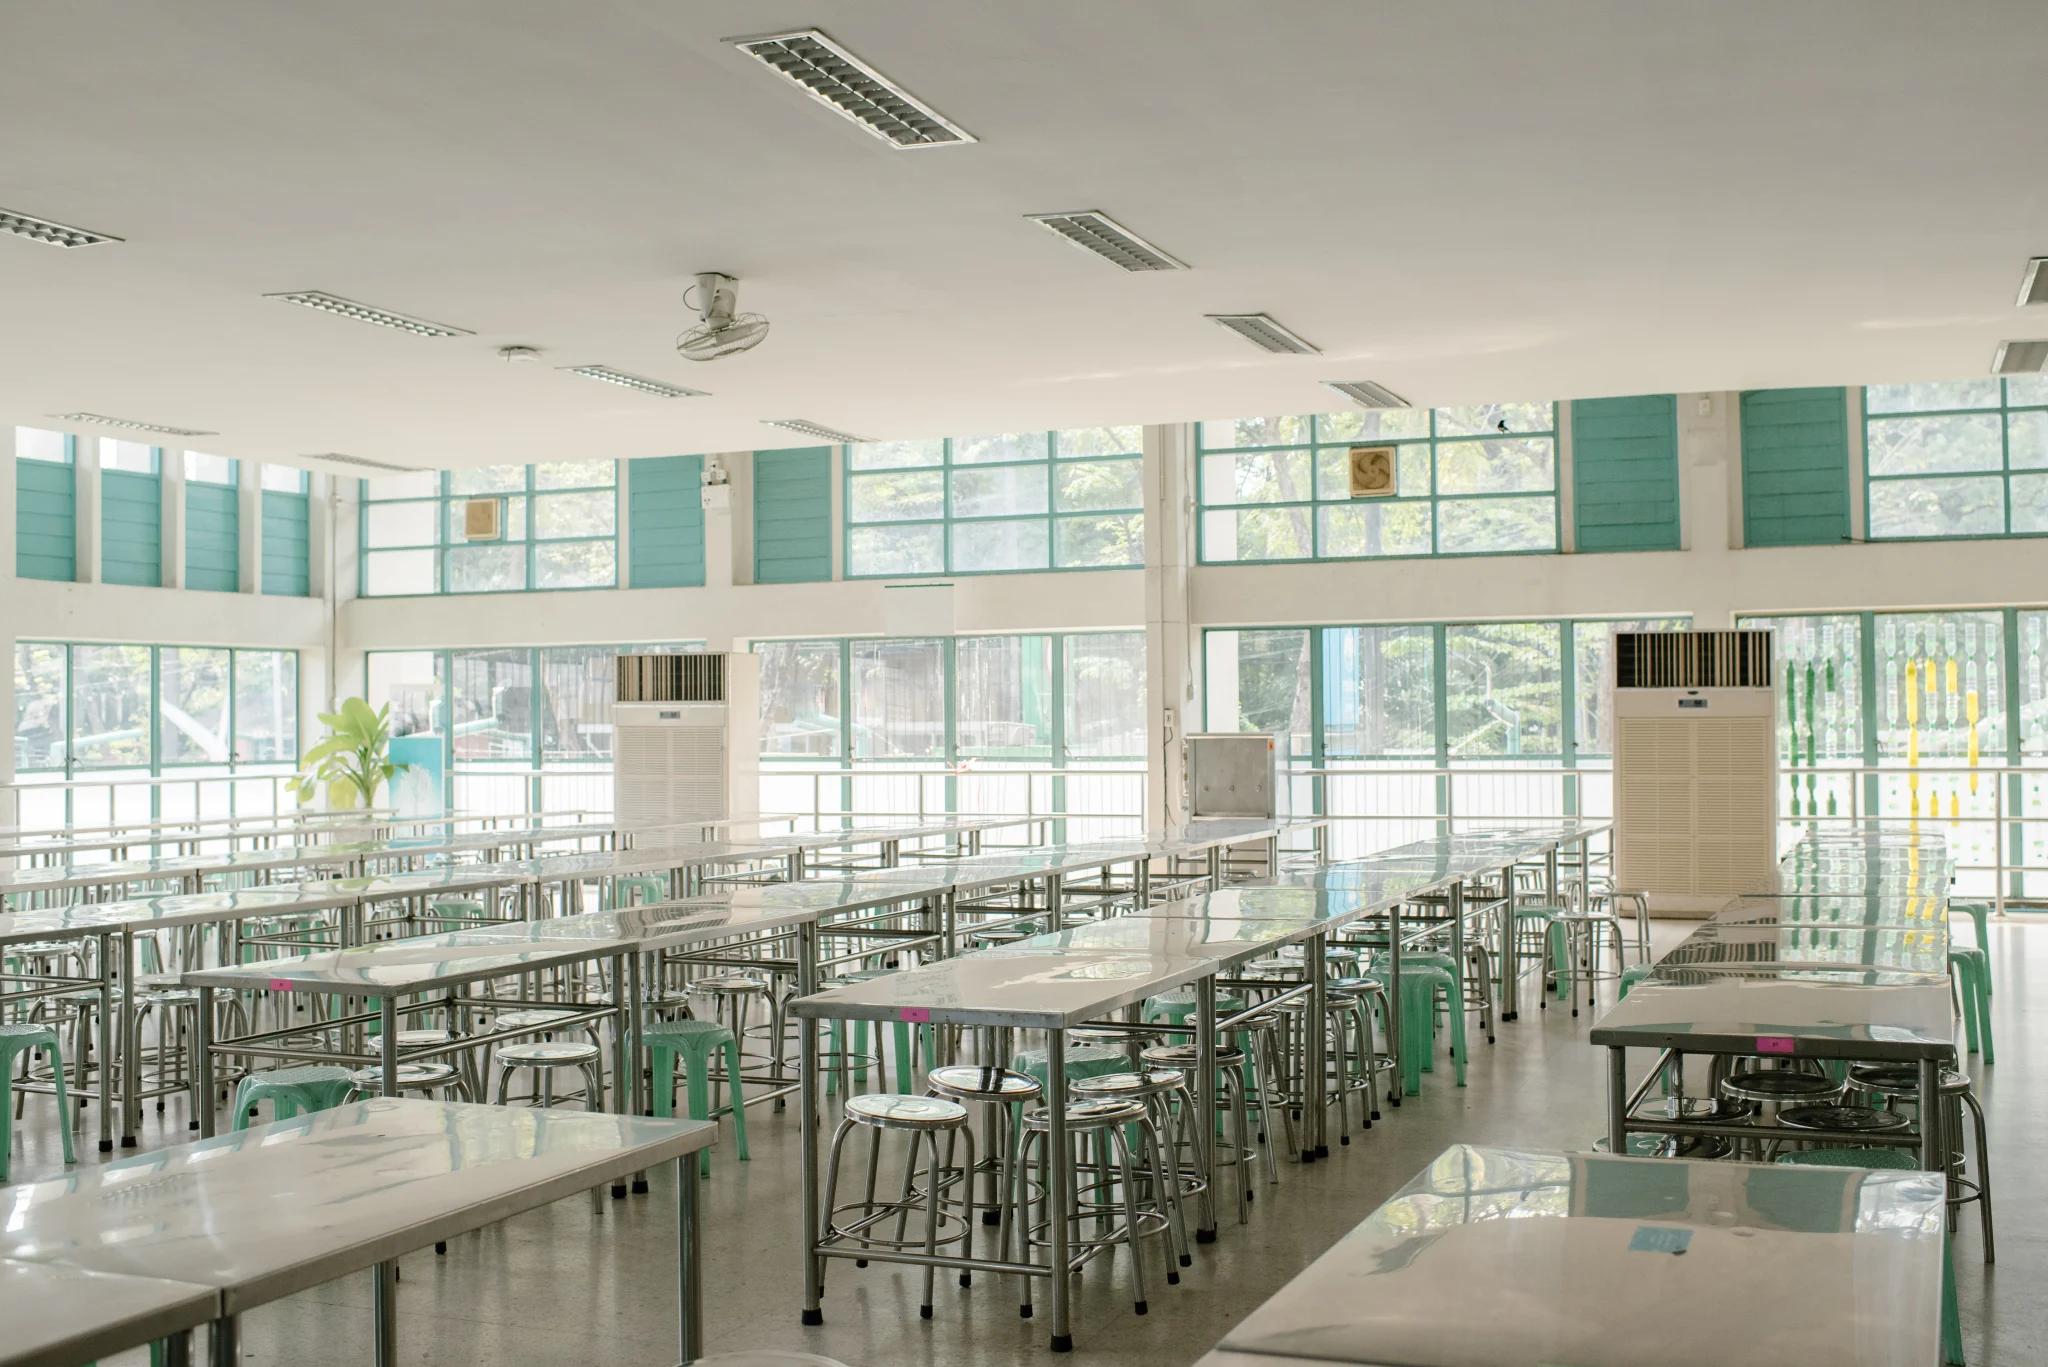 large classroom with tables and chairs facing front of room surroundd by glass window walls at higher education facility